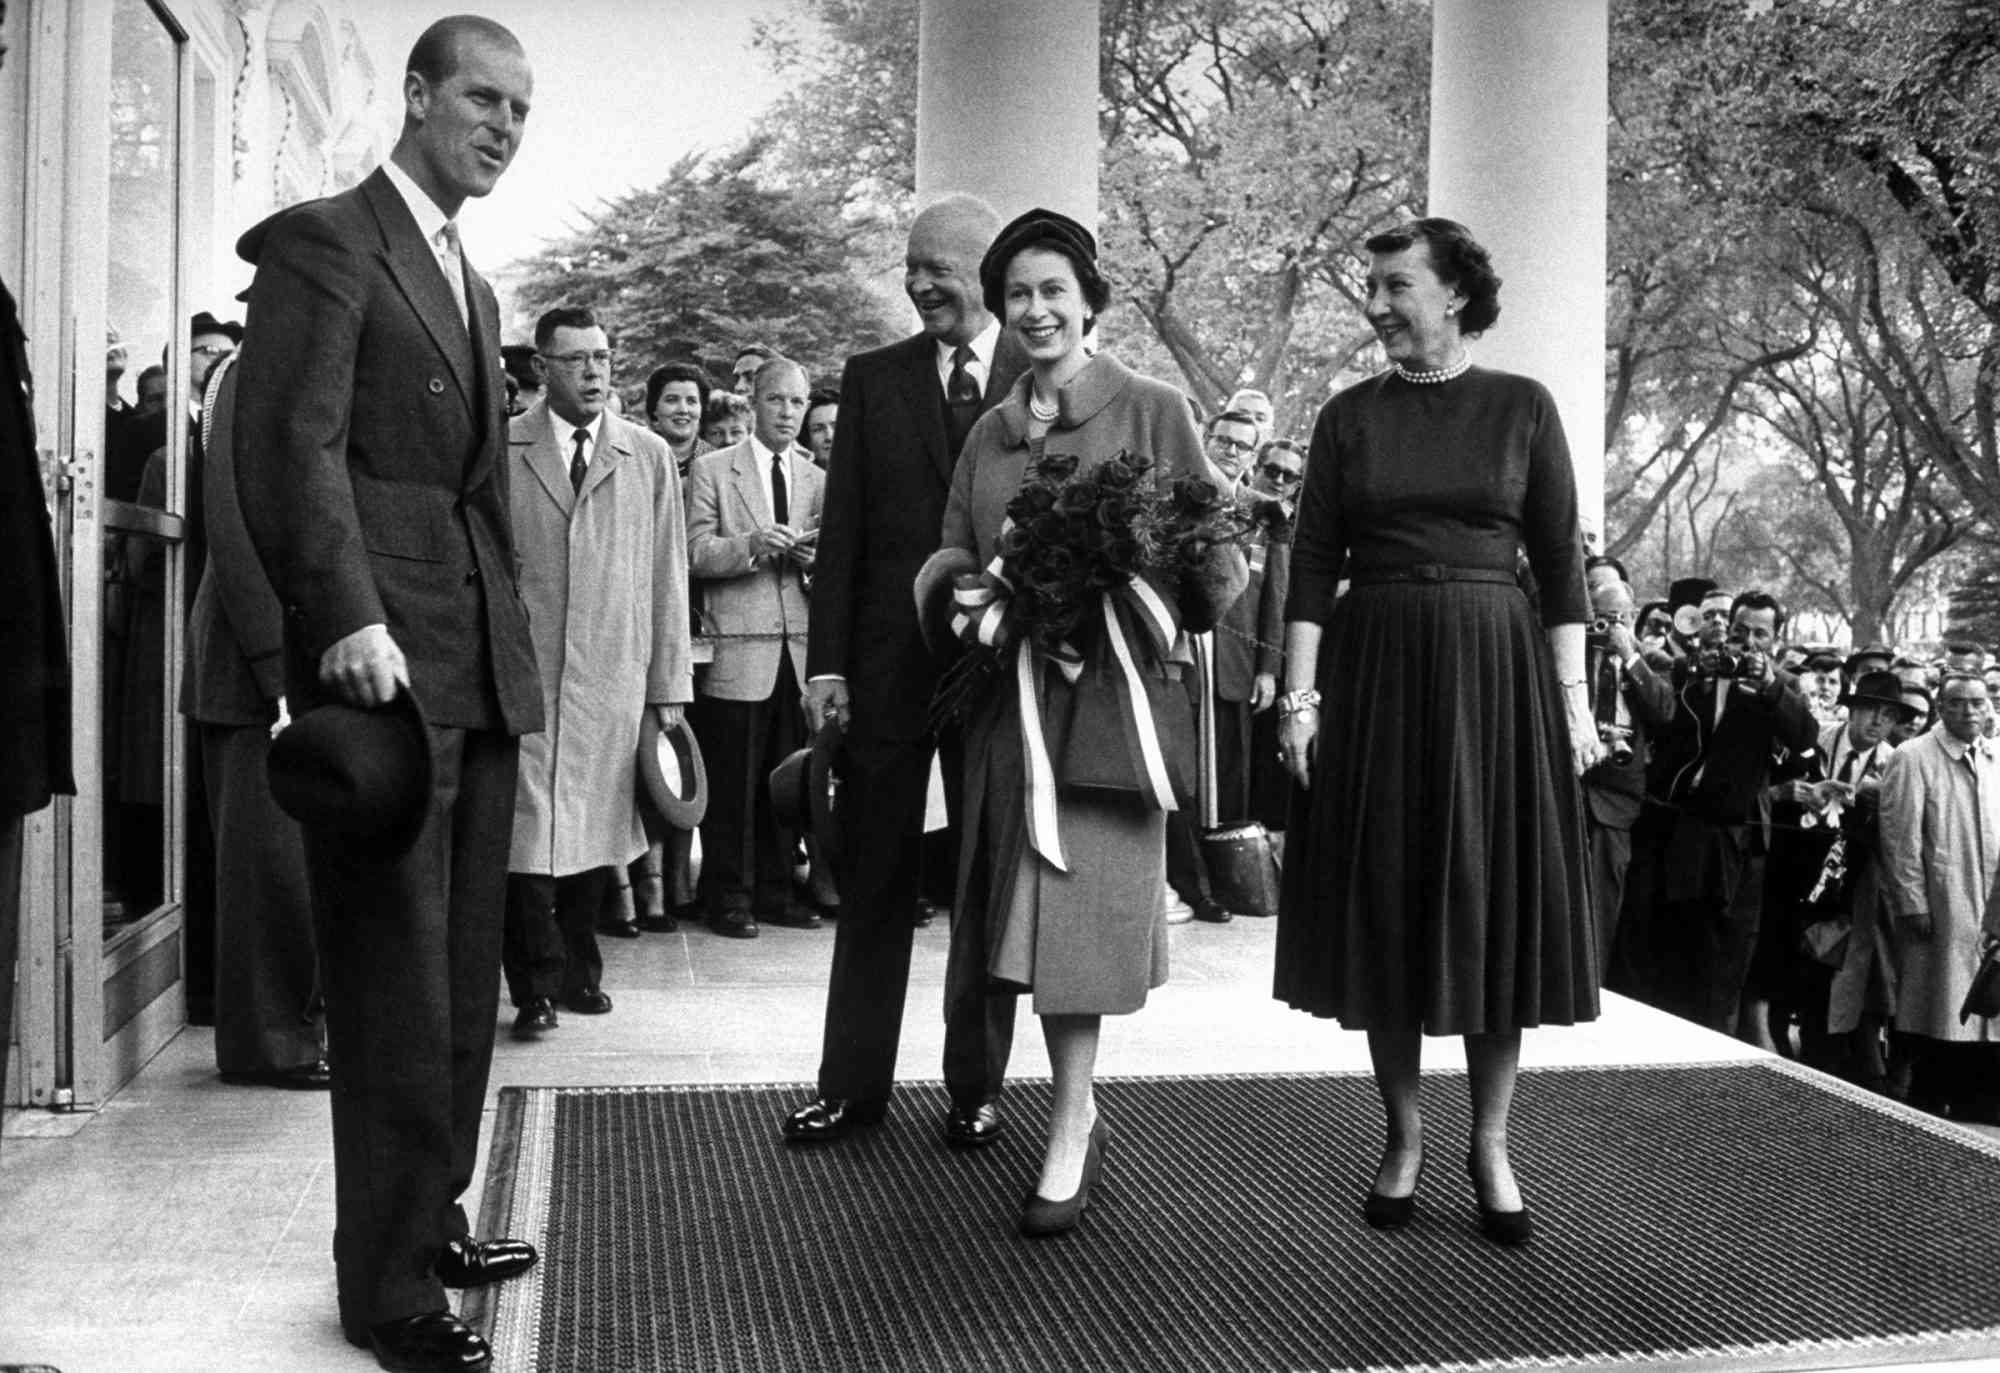 Queen Elizabeth and Prince Philip arriving at the White House and greet President Eisenhower, Washington, District of Columbia, 1957